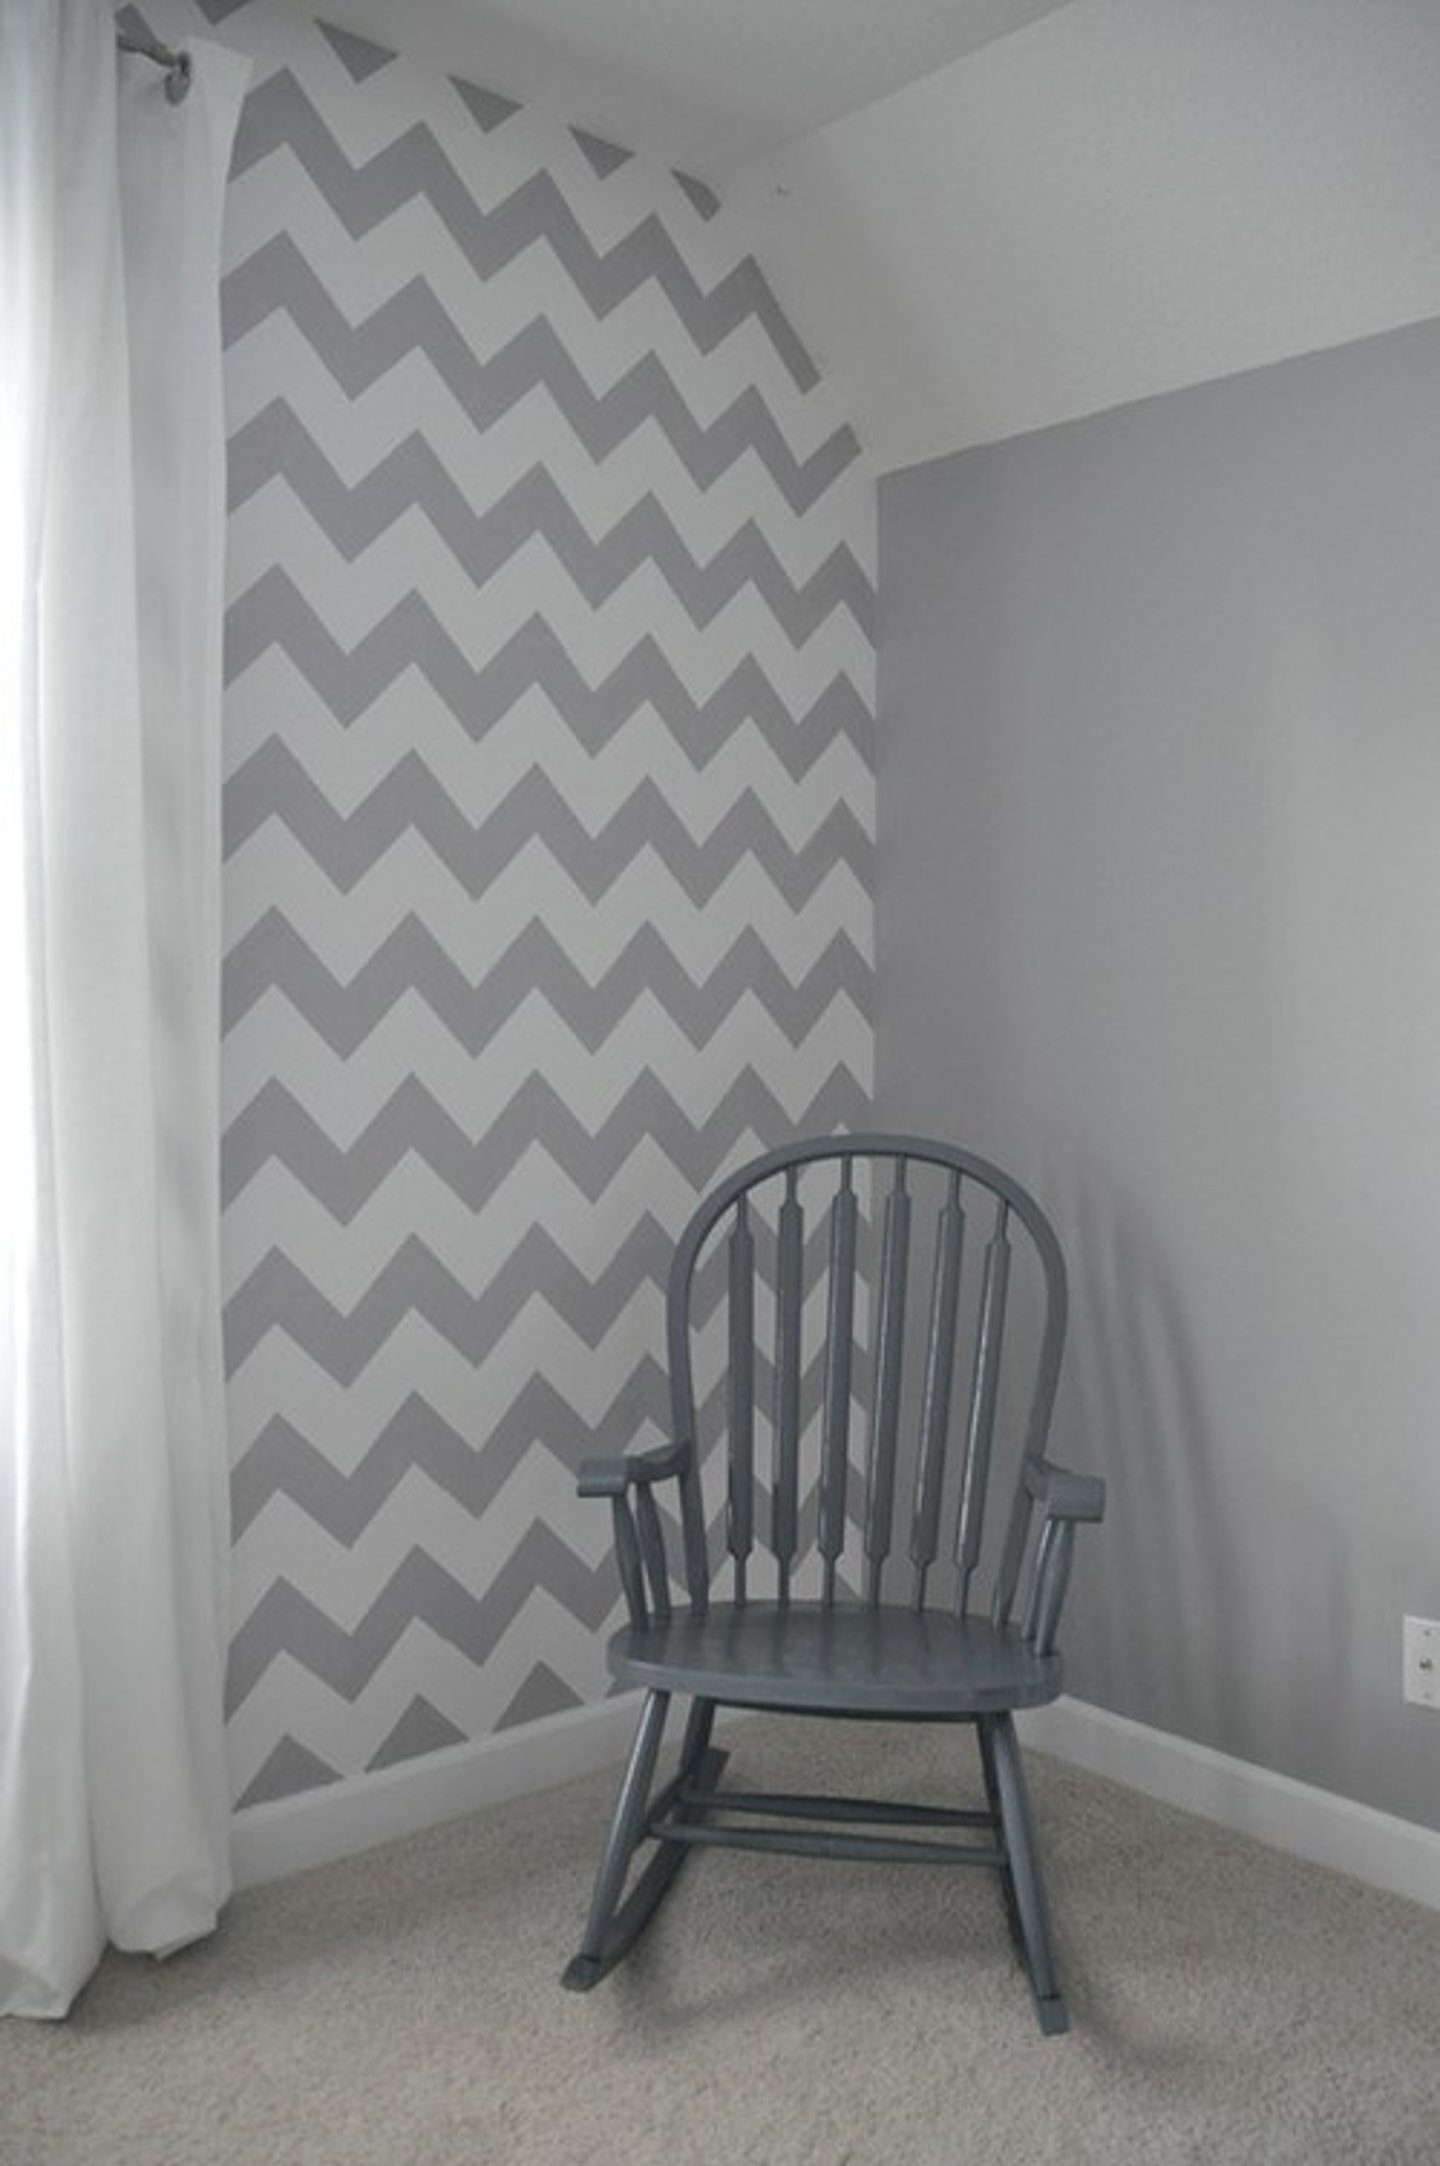 Wall painted with grey and white chevon stripes